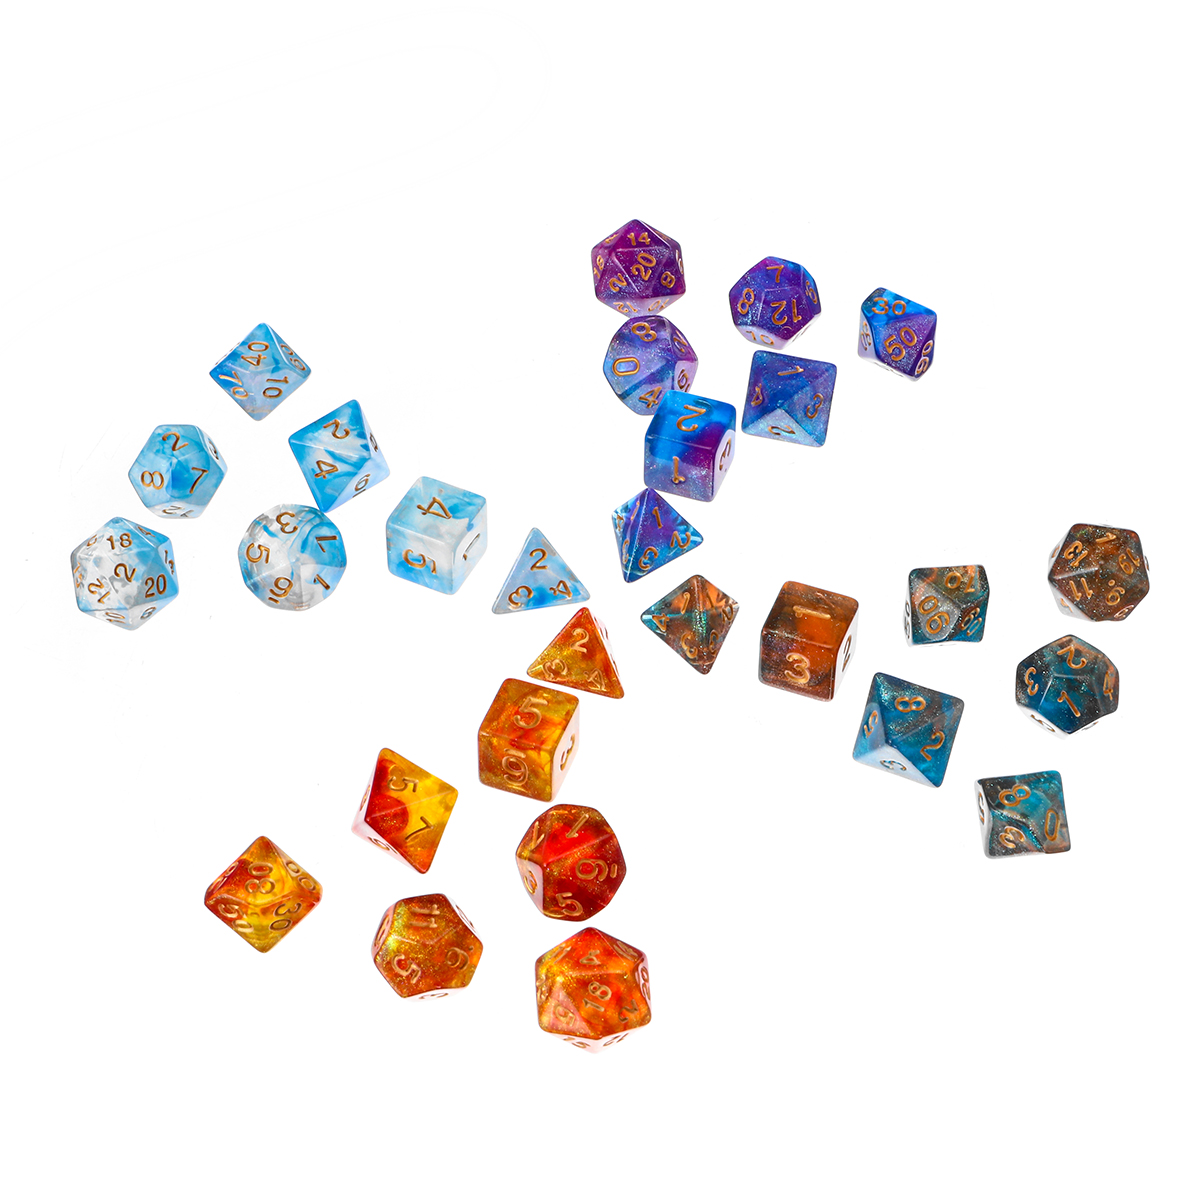 28Pcs-Galaxy-Concept-Polyhedral-Dice-Acrylic-Dices-Role-Playing-Board-Table-Game-With-Pouch-1709494-10